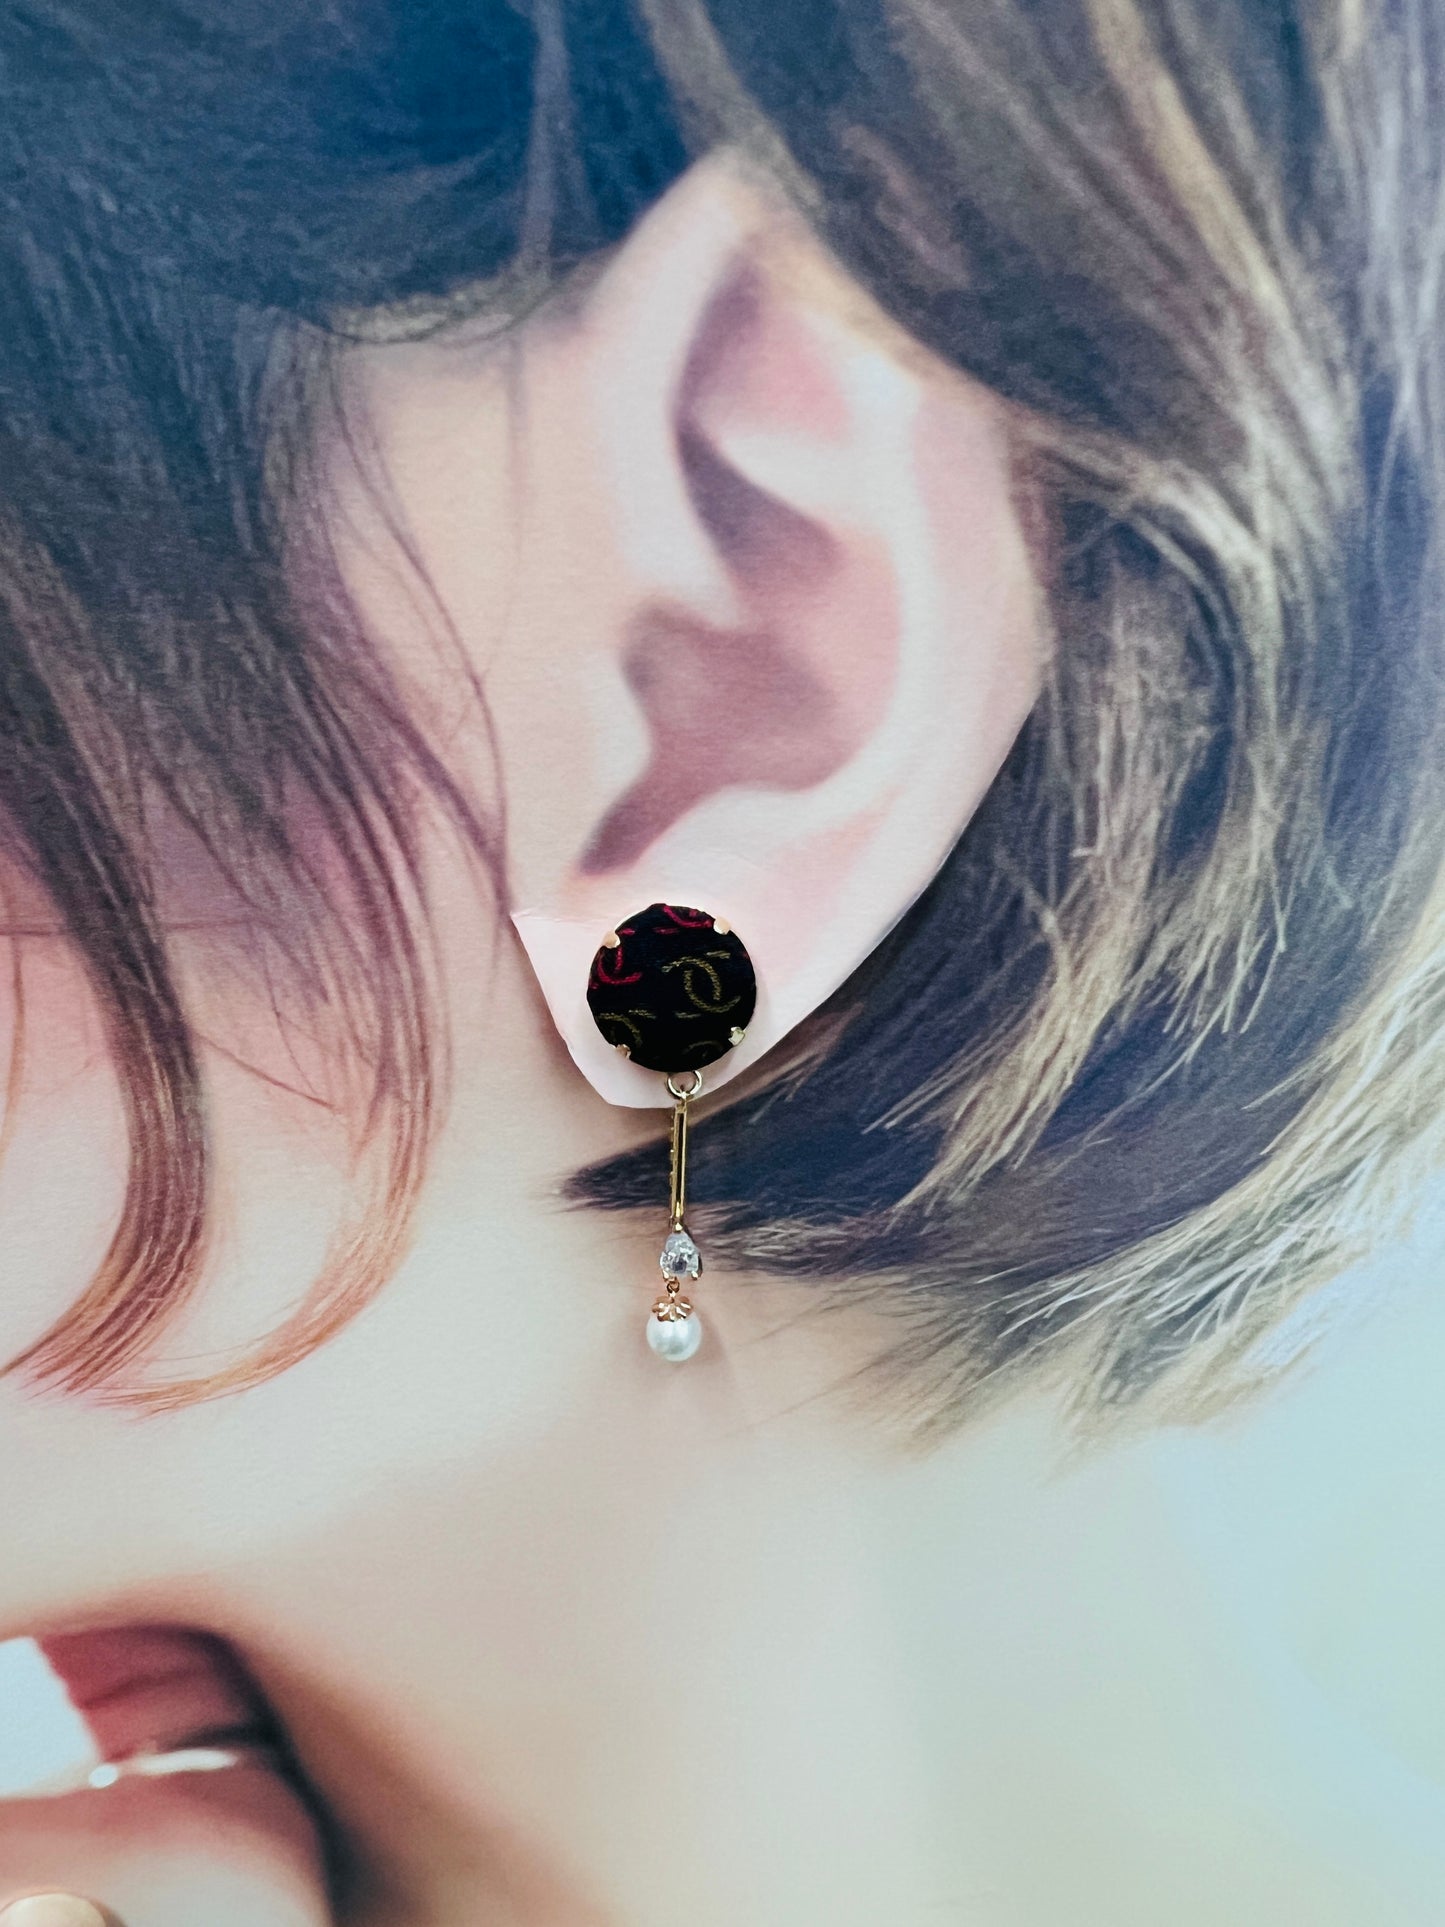 CC-Black with Bison & Cardinal CC logo- CC047- earring collection